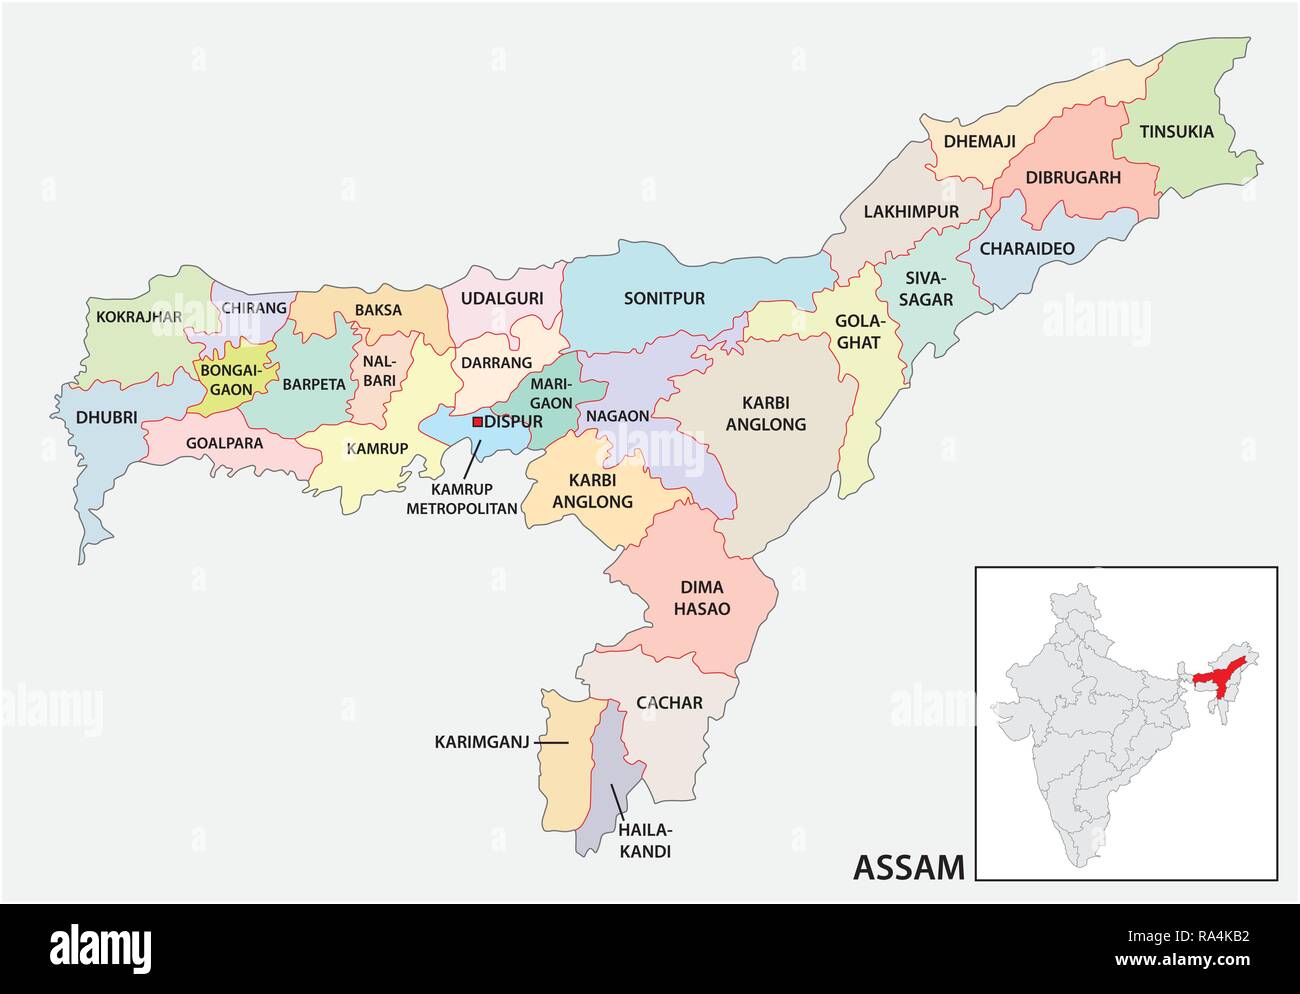 List of districts of Assam - Wikipedia